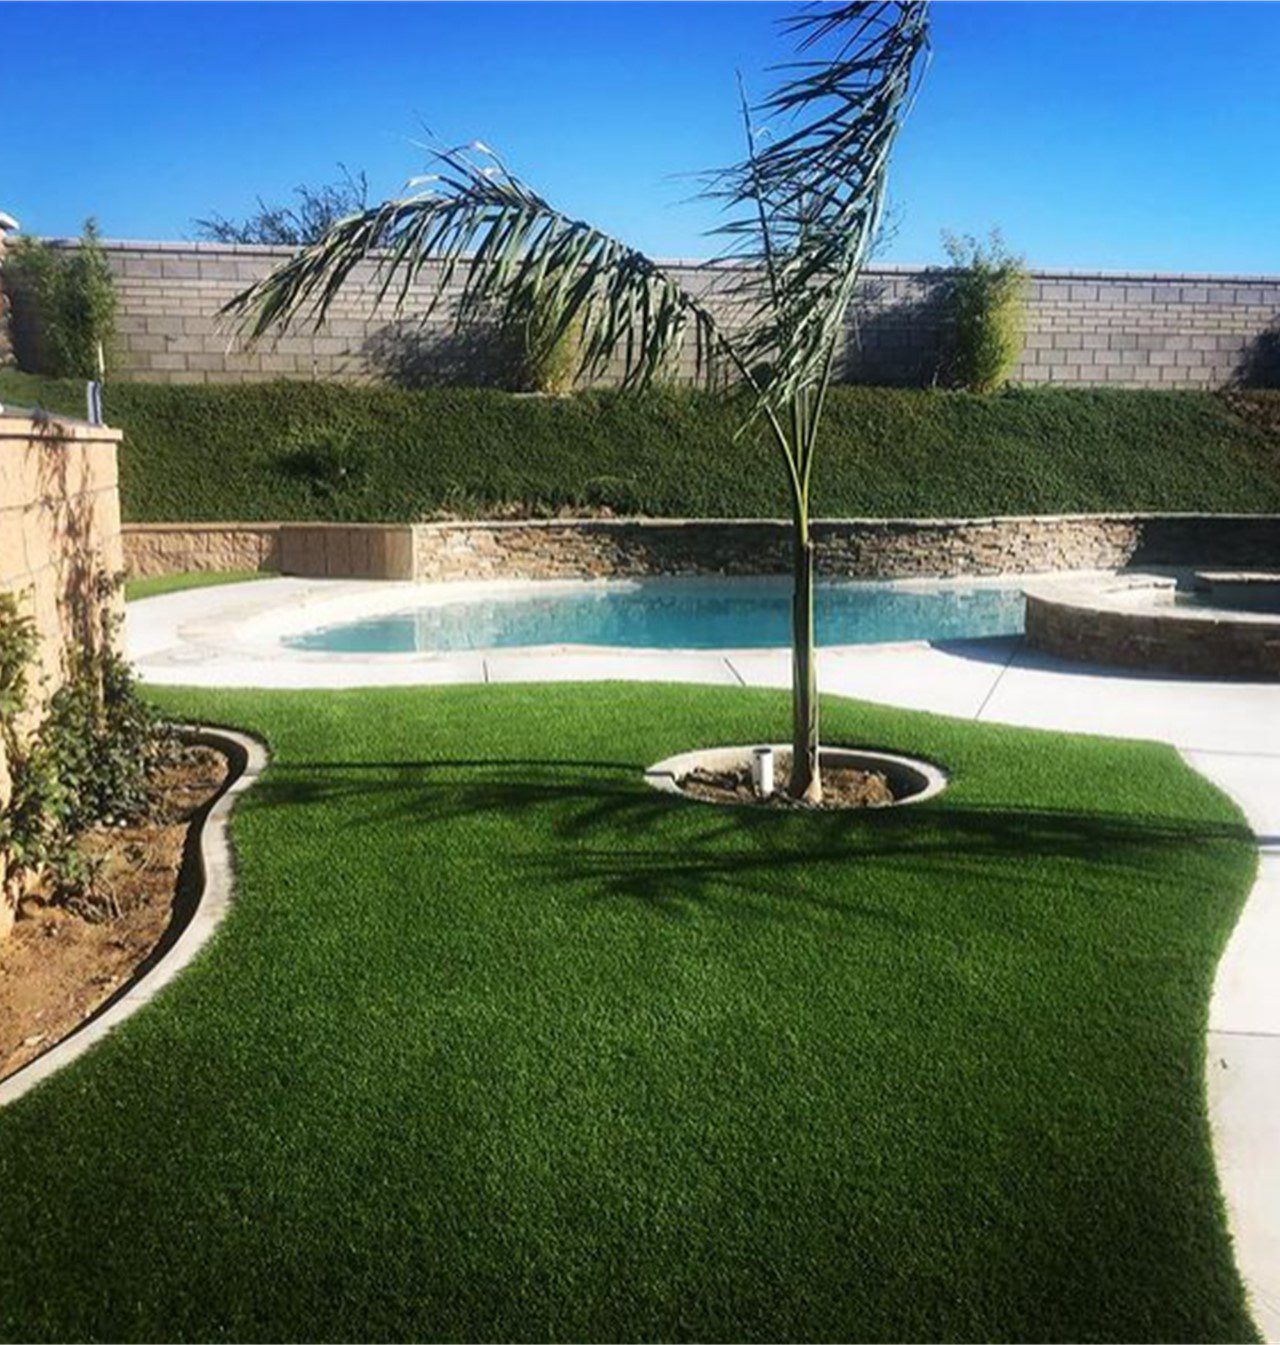 Artificial Grass Maintenance, Helpful Tips to clean your Turf, Corona